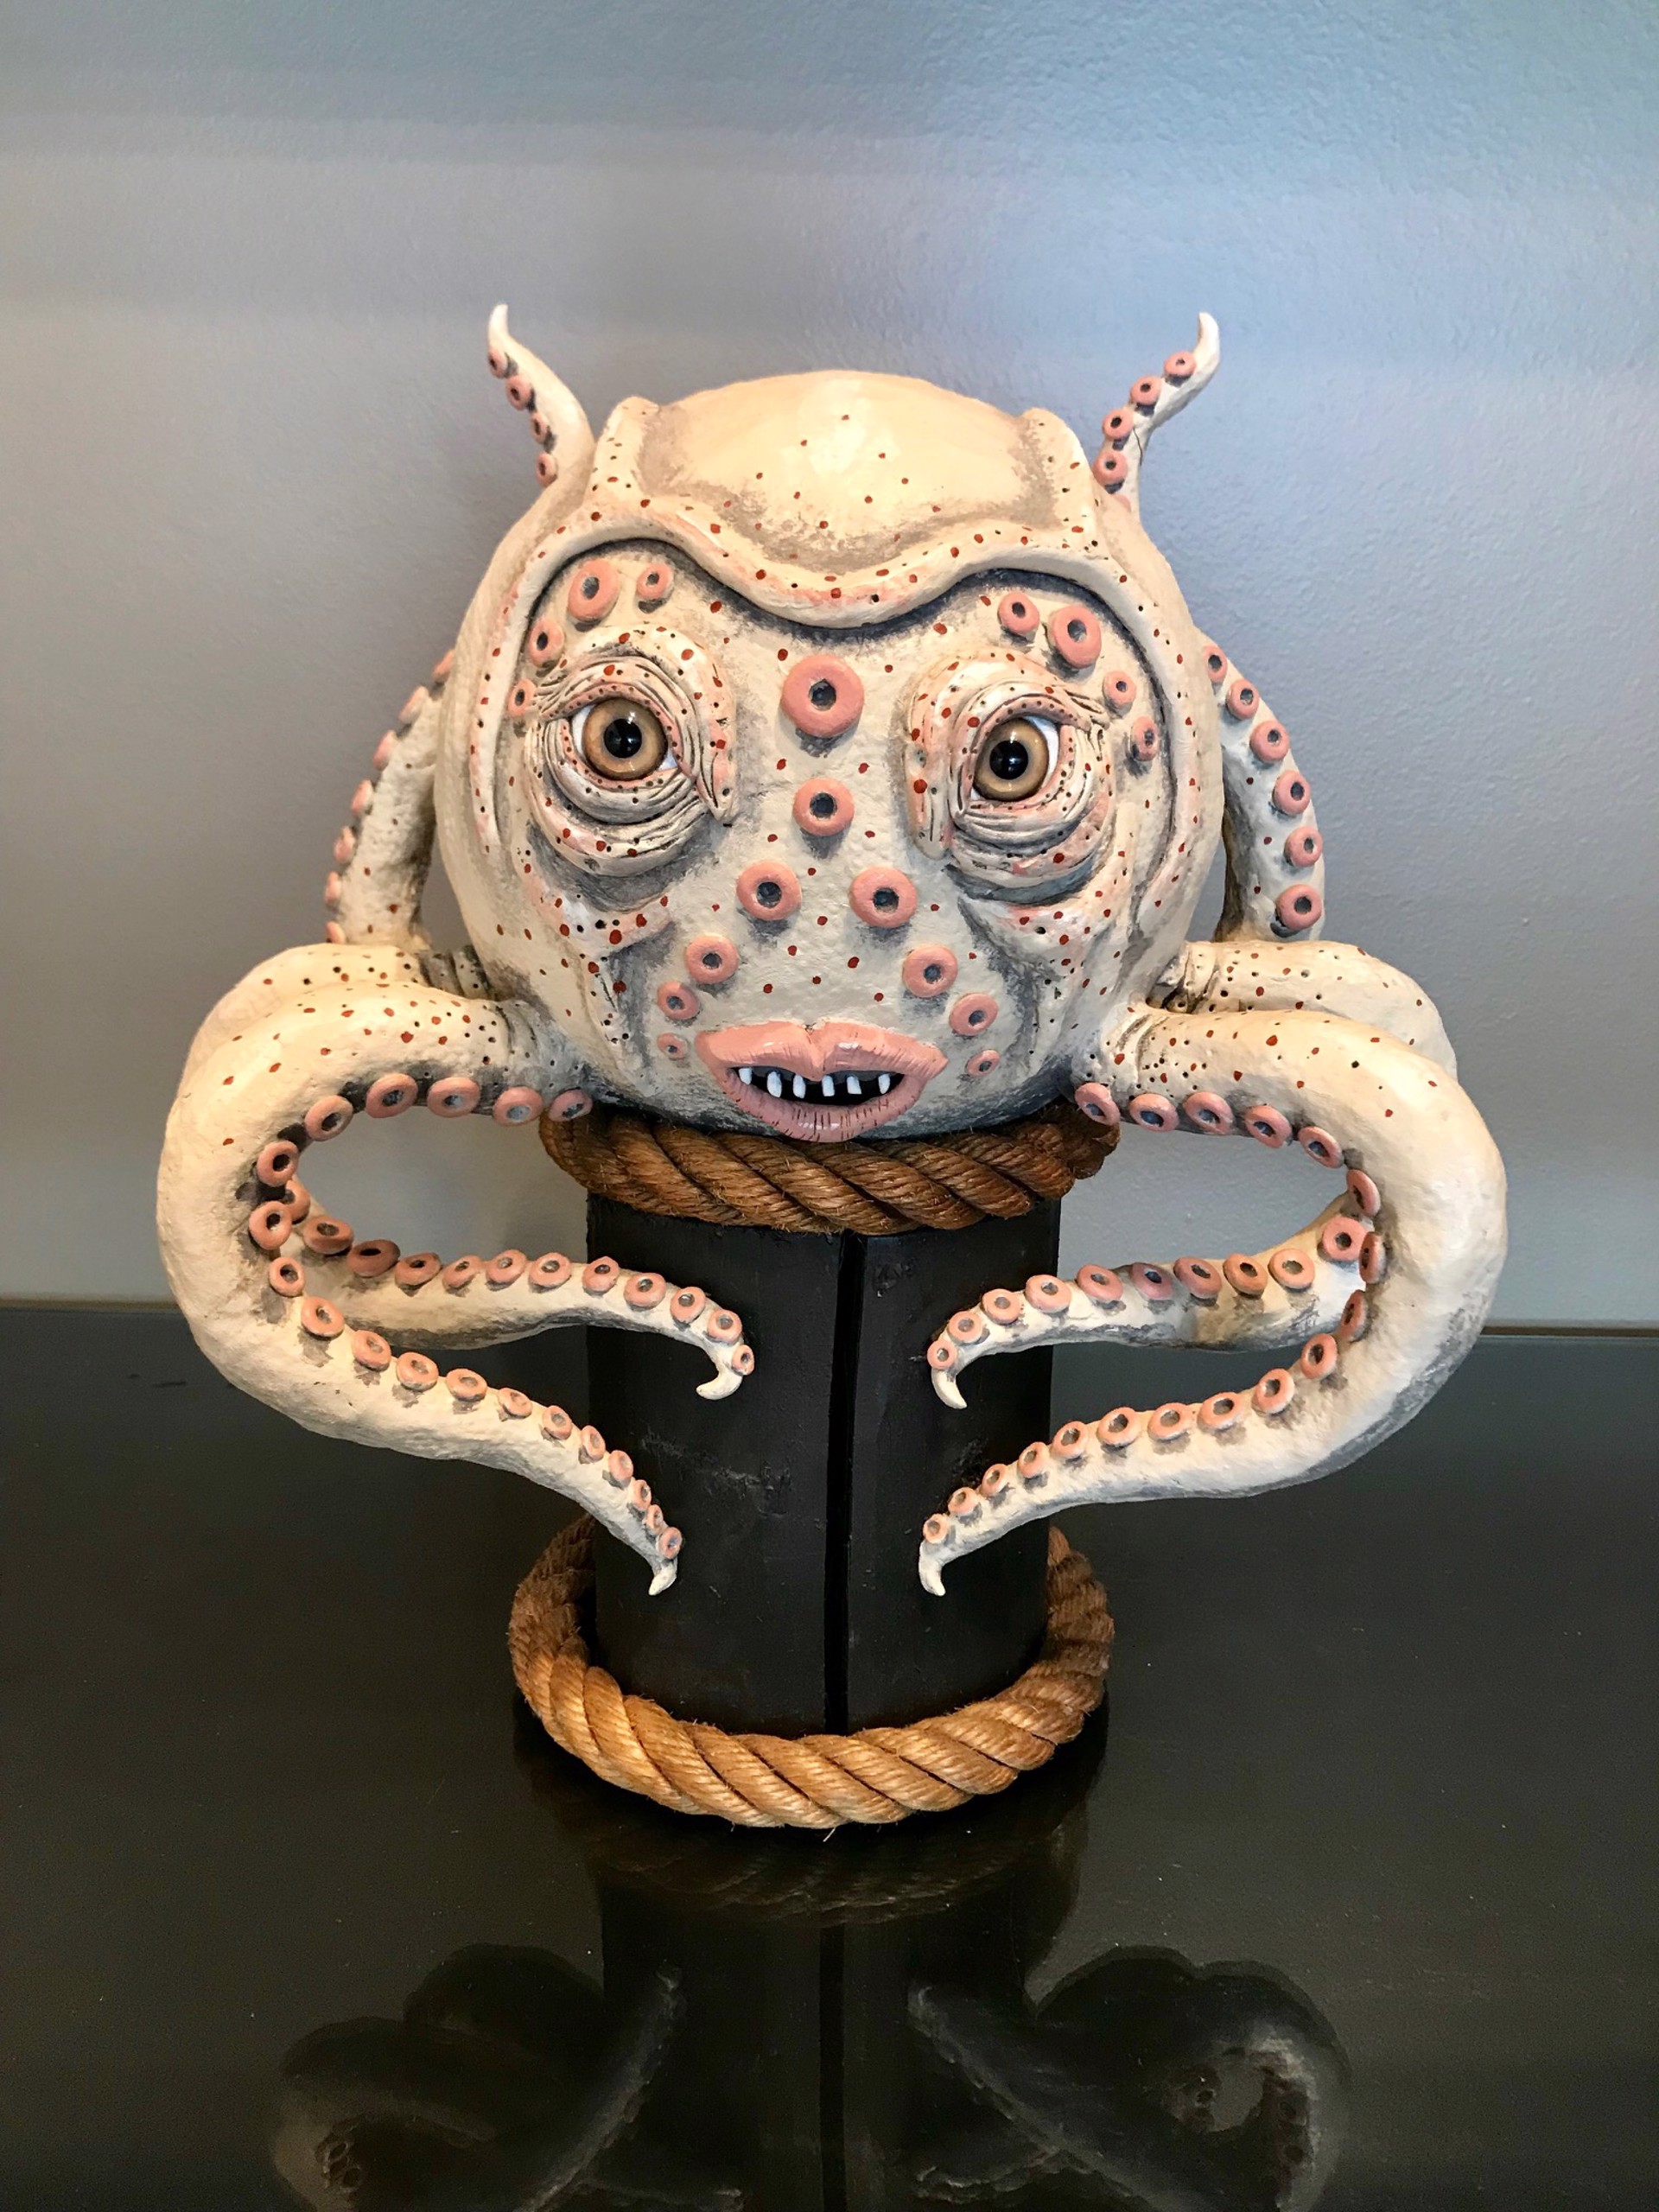 Seated Octopus by William Marhoefer